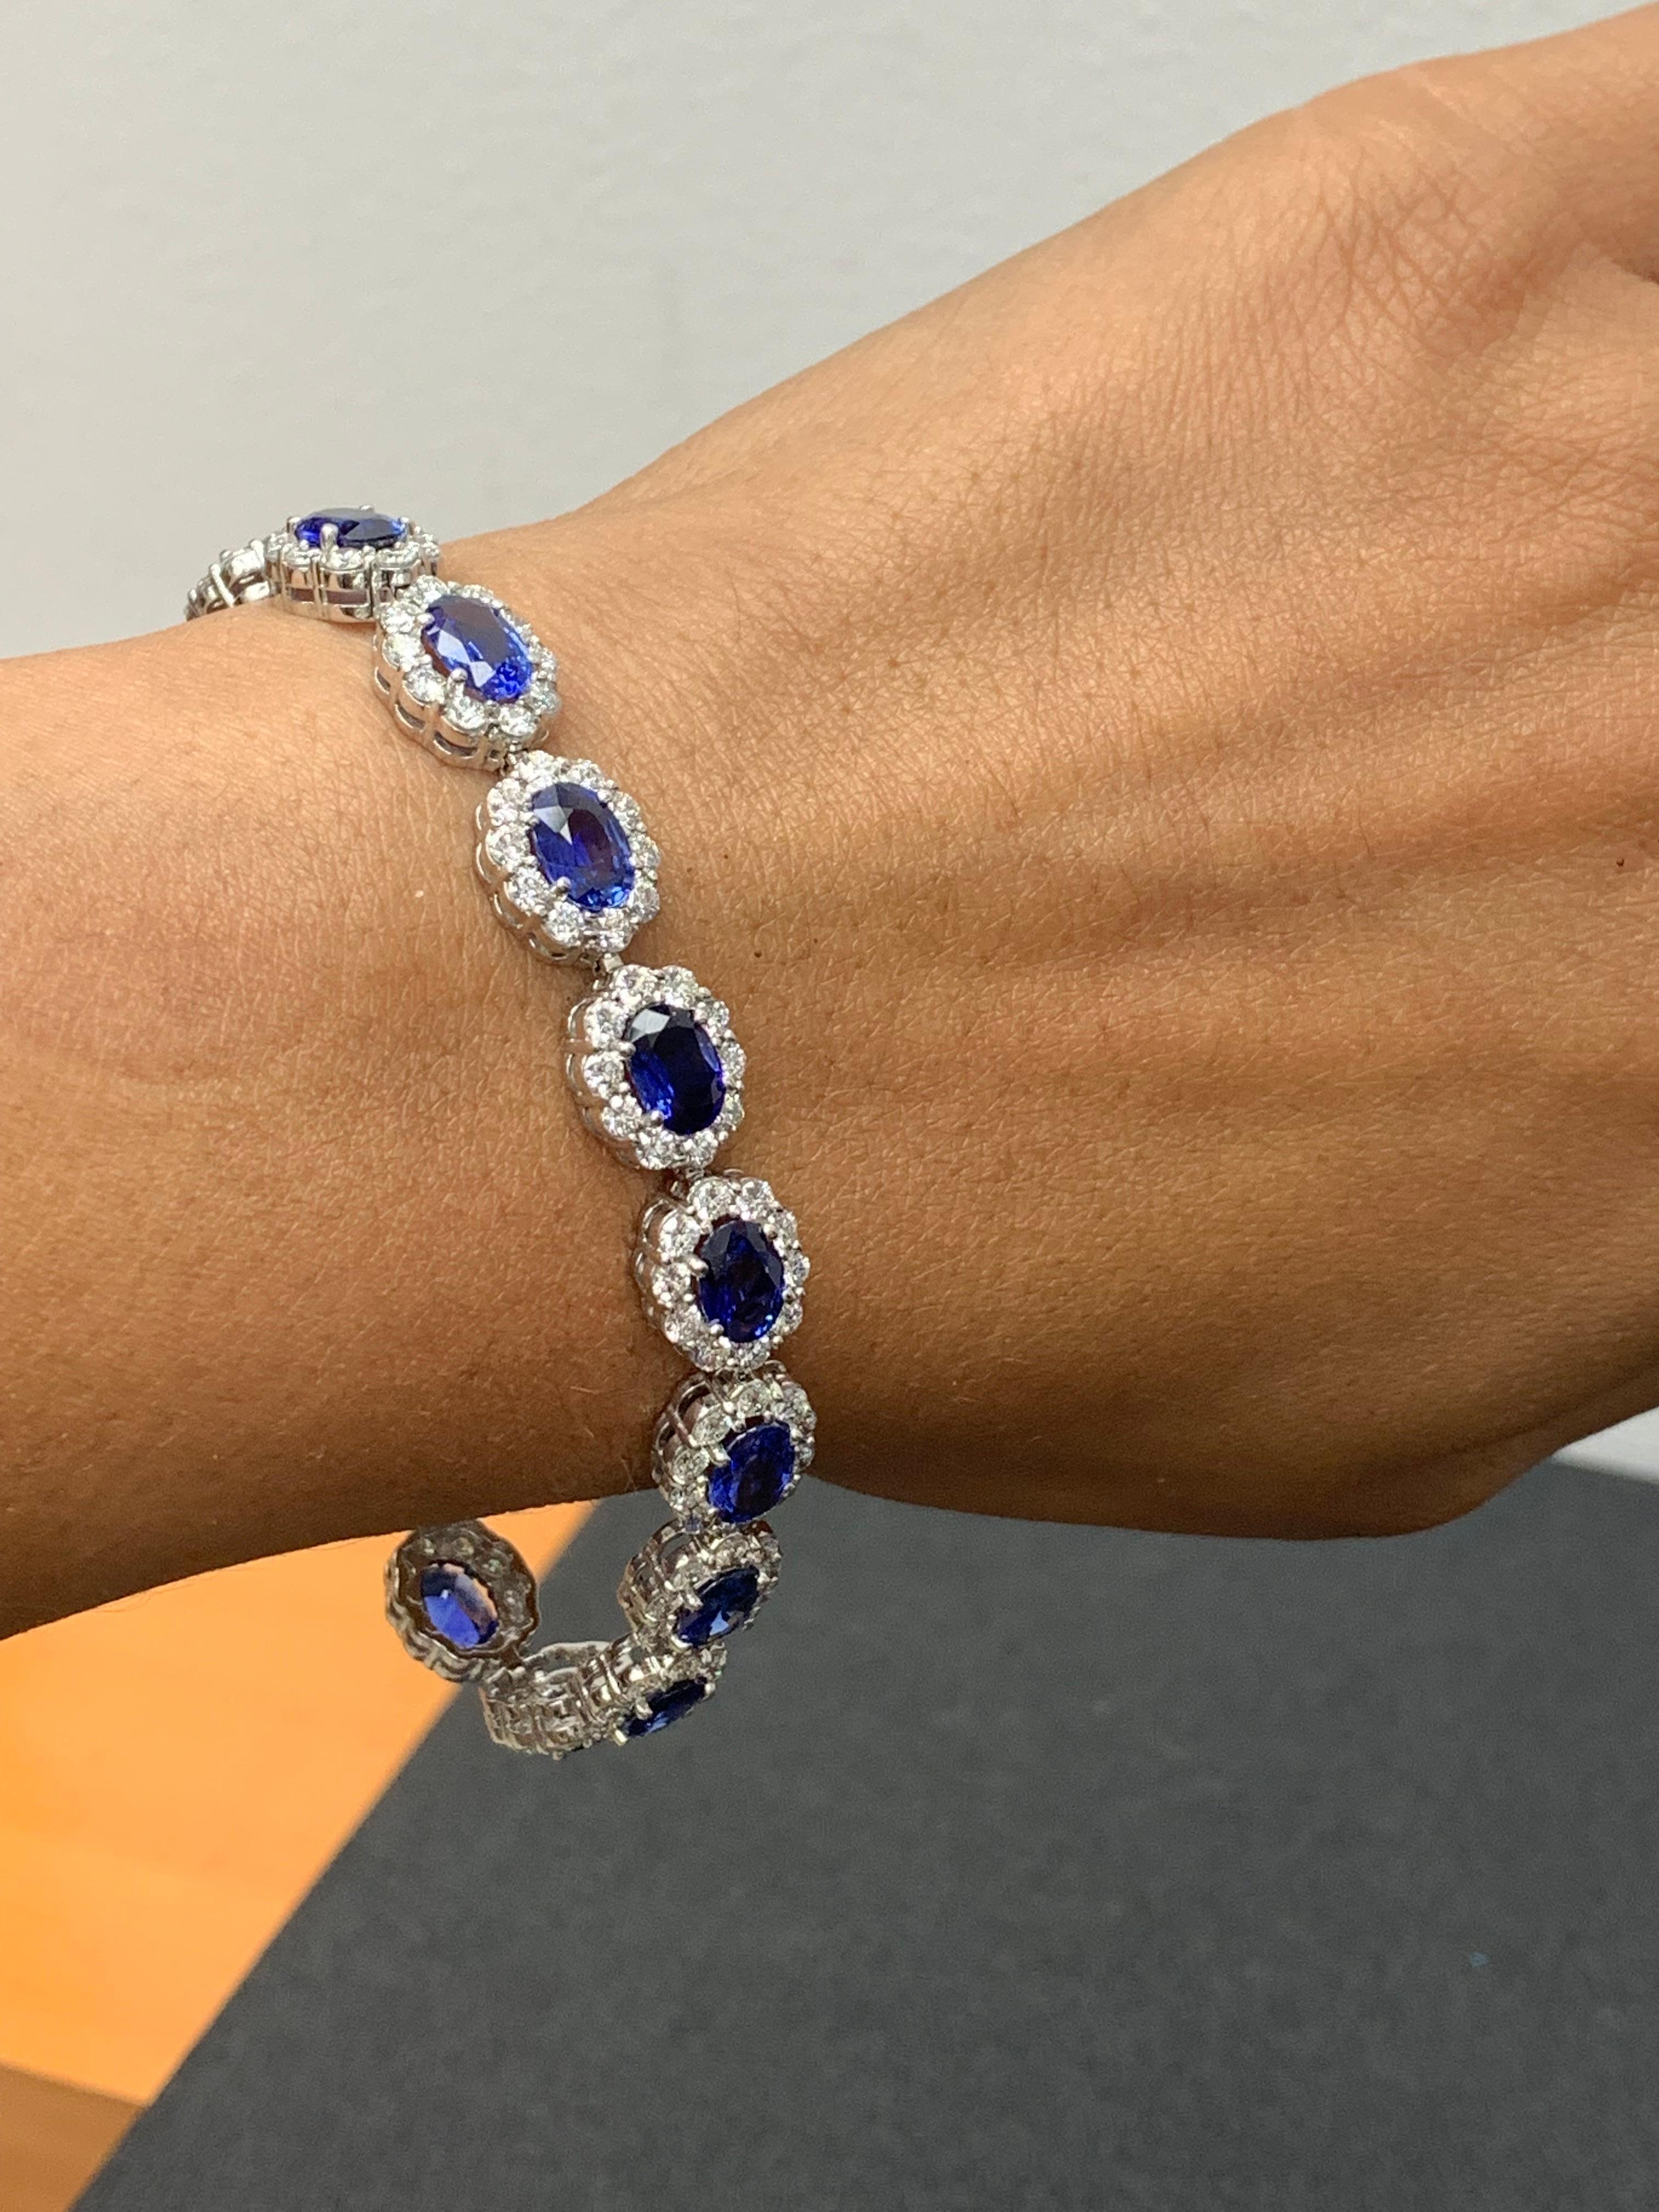 13.88 Carat Oval Cut Blue Sapphire and Diamond Halo Bracelet in 14K White Gold For Sale 3